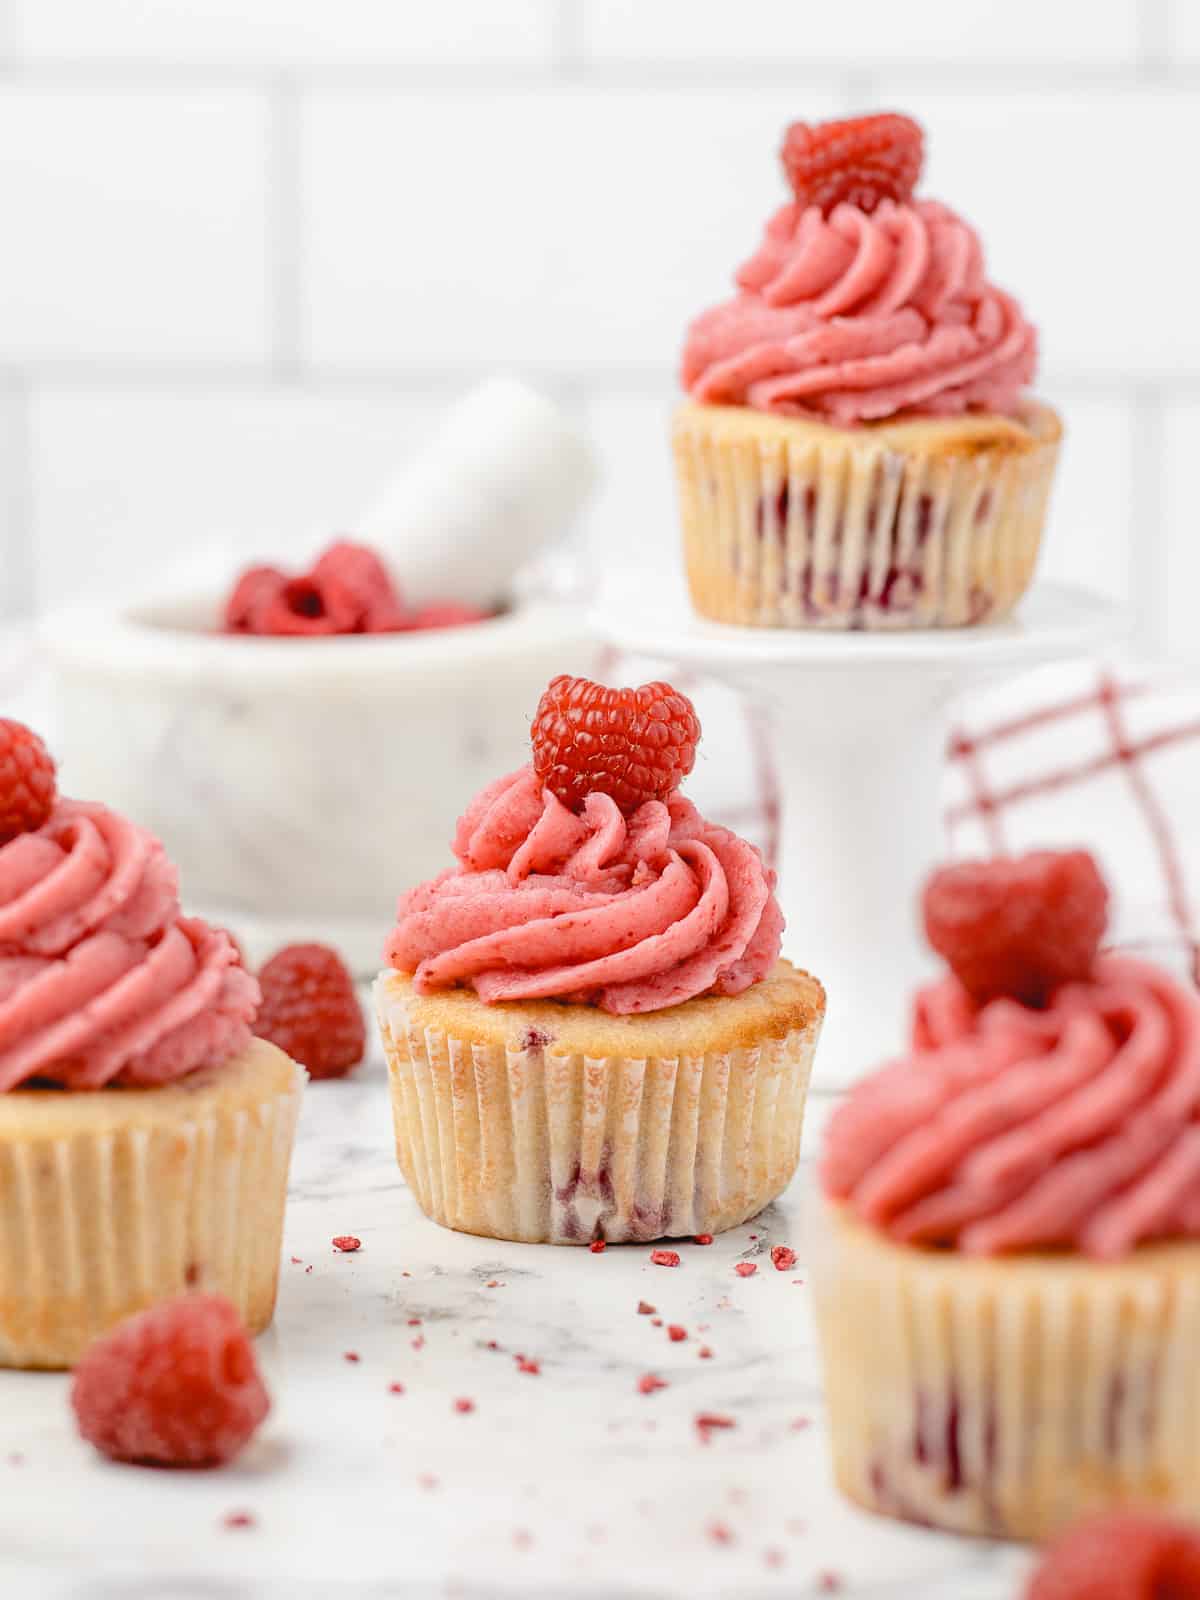 Decorated cupcakes surrounded by freeze dried raspberry powder and fresh raspberries.